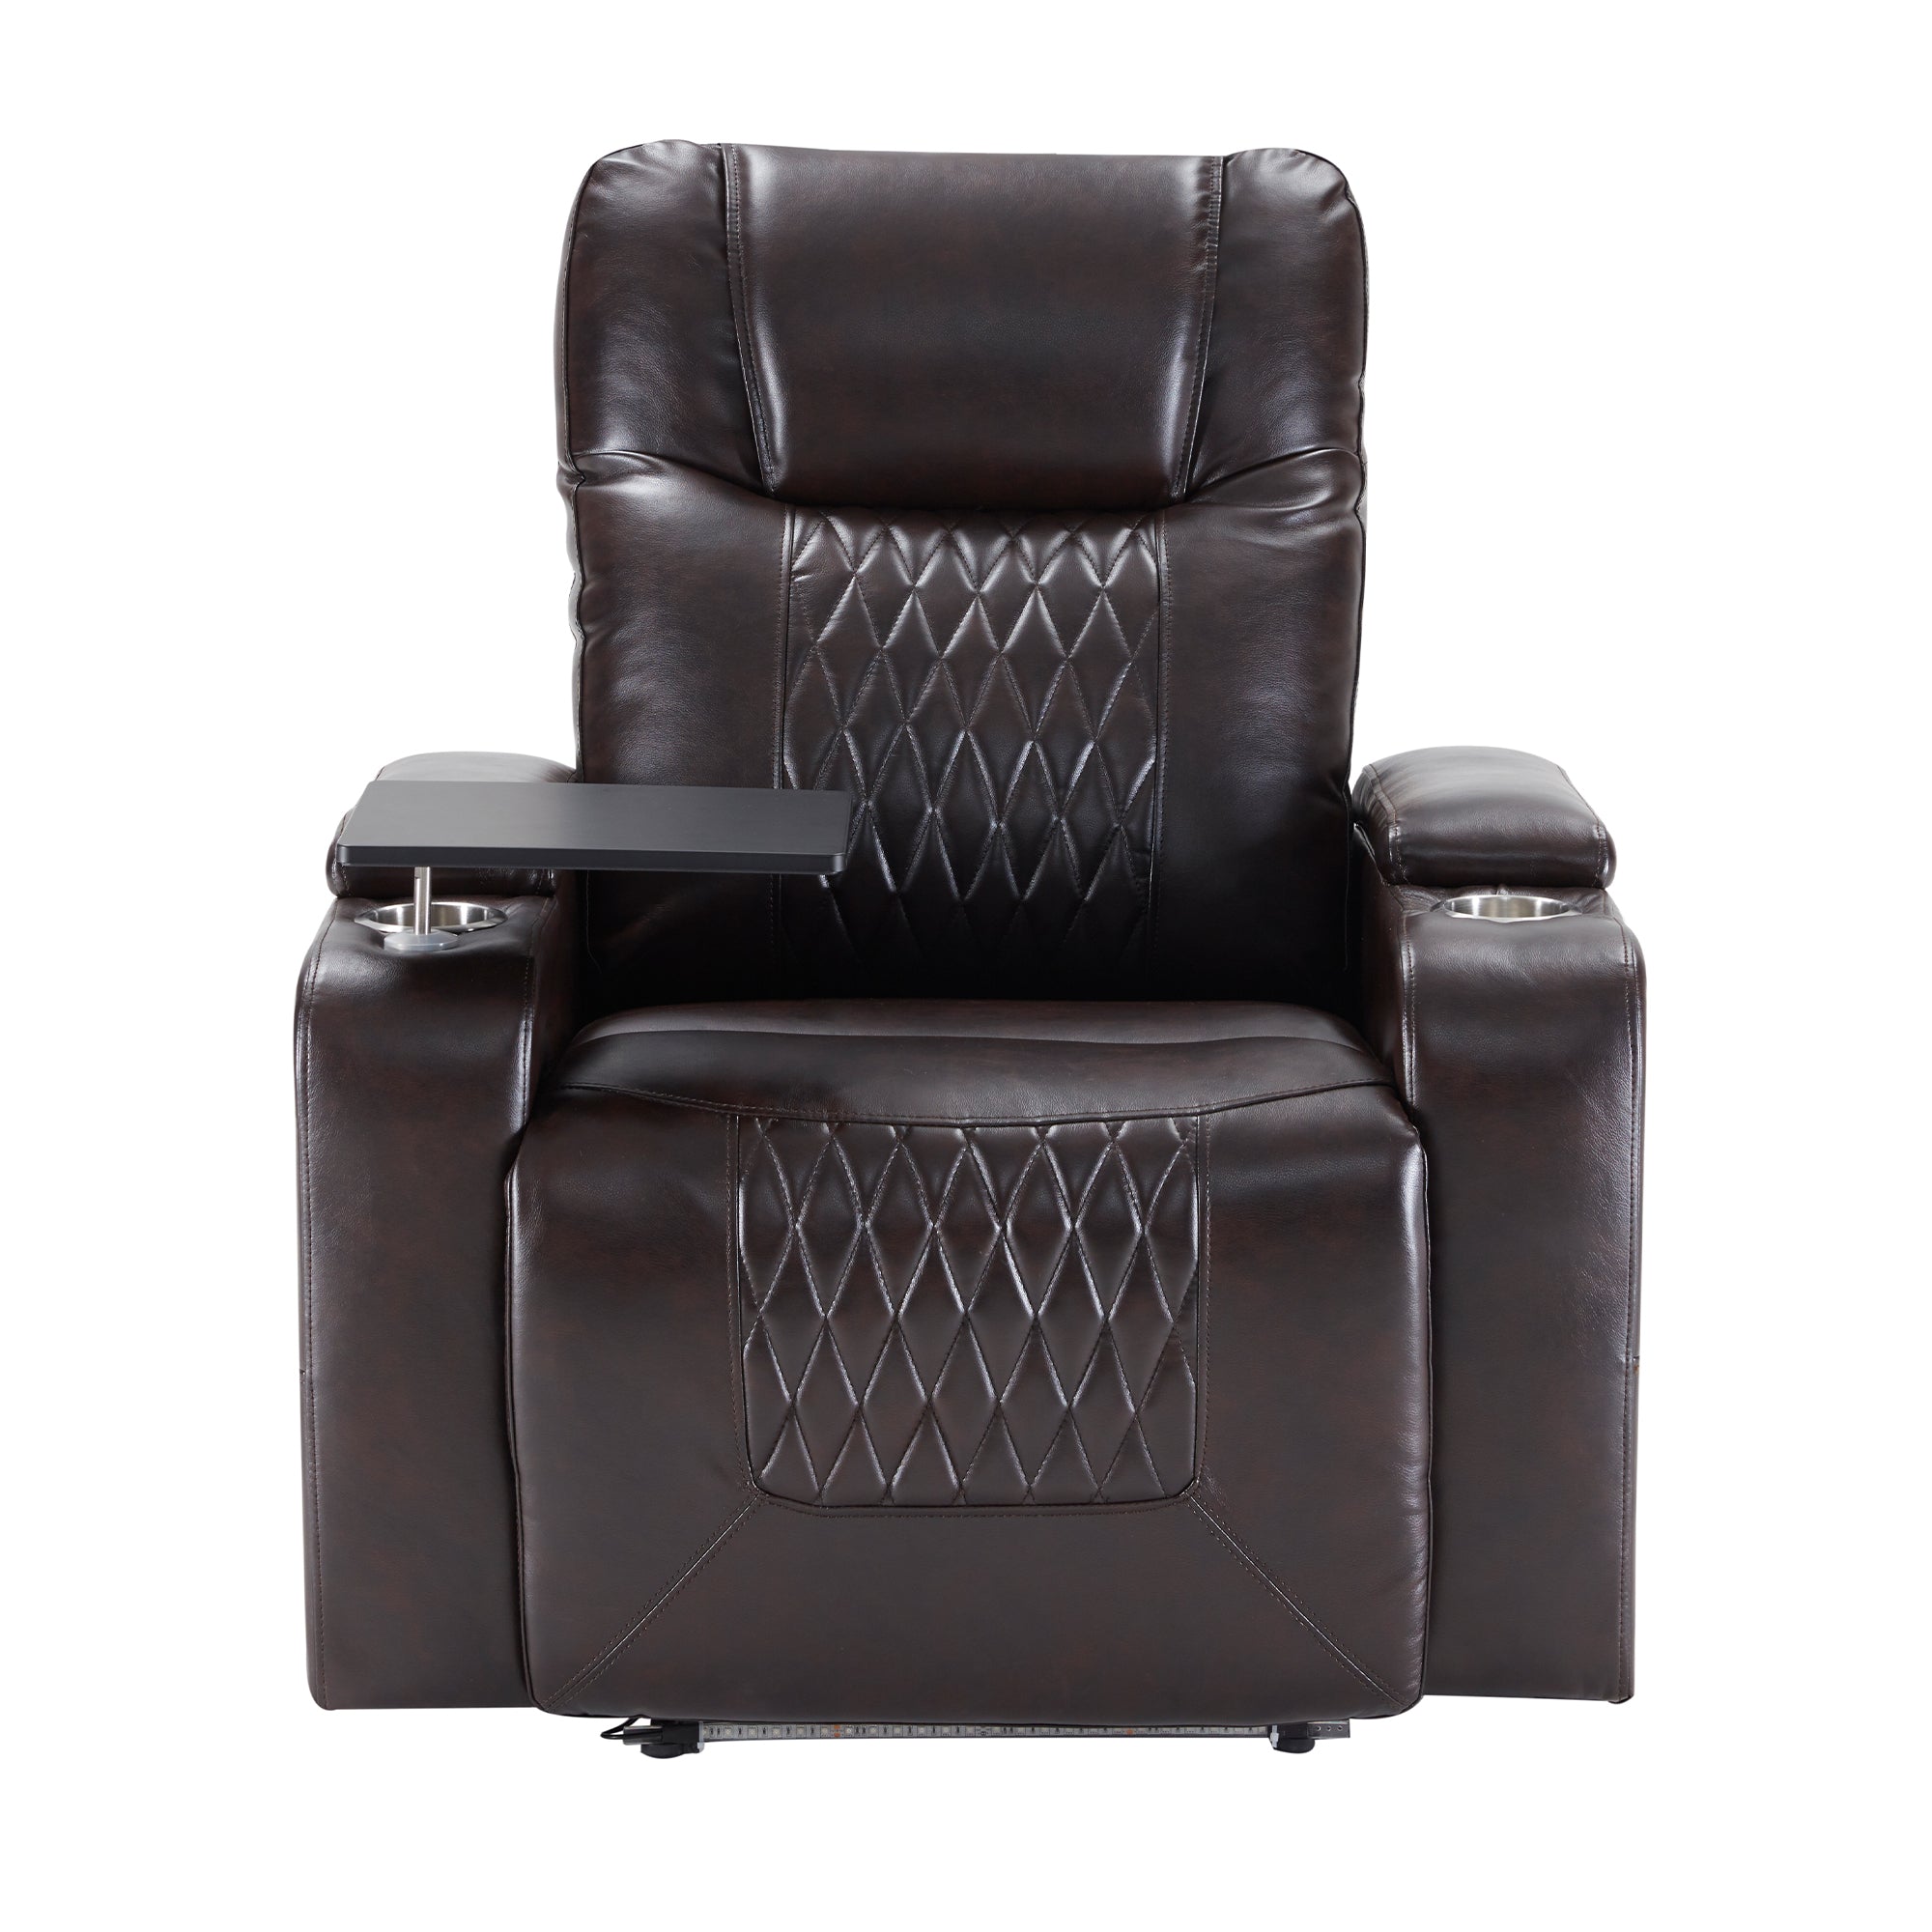 Power Motion Recliner with USB Charging Port and Hidden Arm Storage 2 Convenient Cup Holders design and 360° Swivel Tray Table-Boyel Living